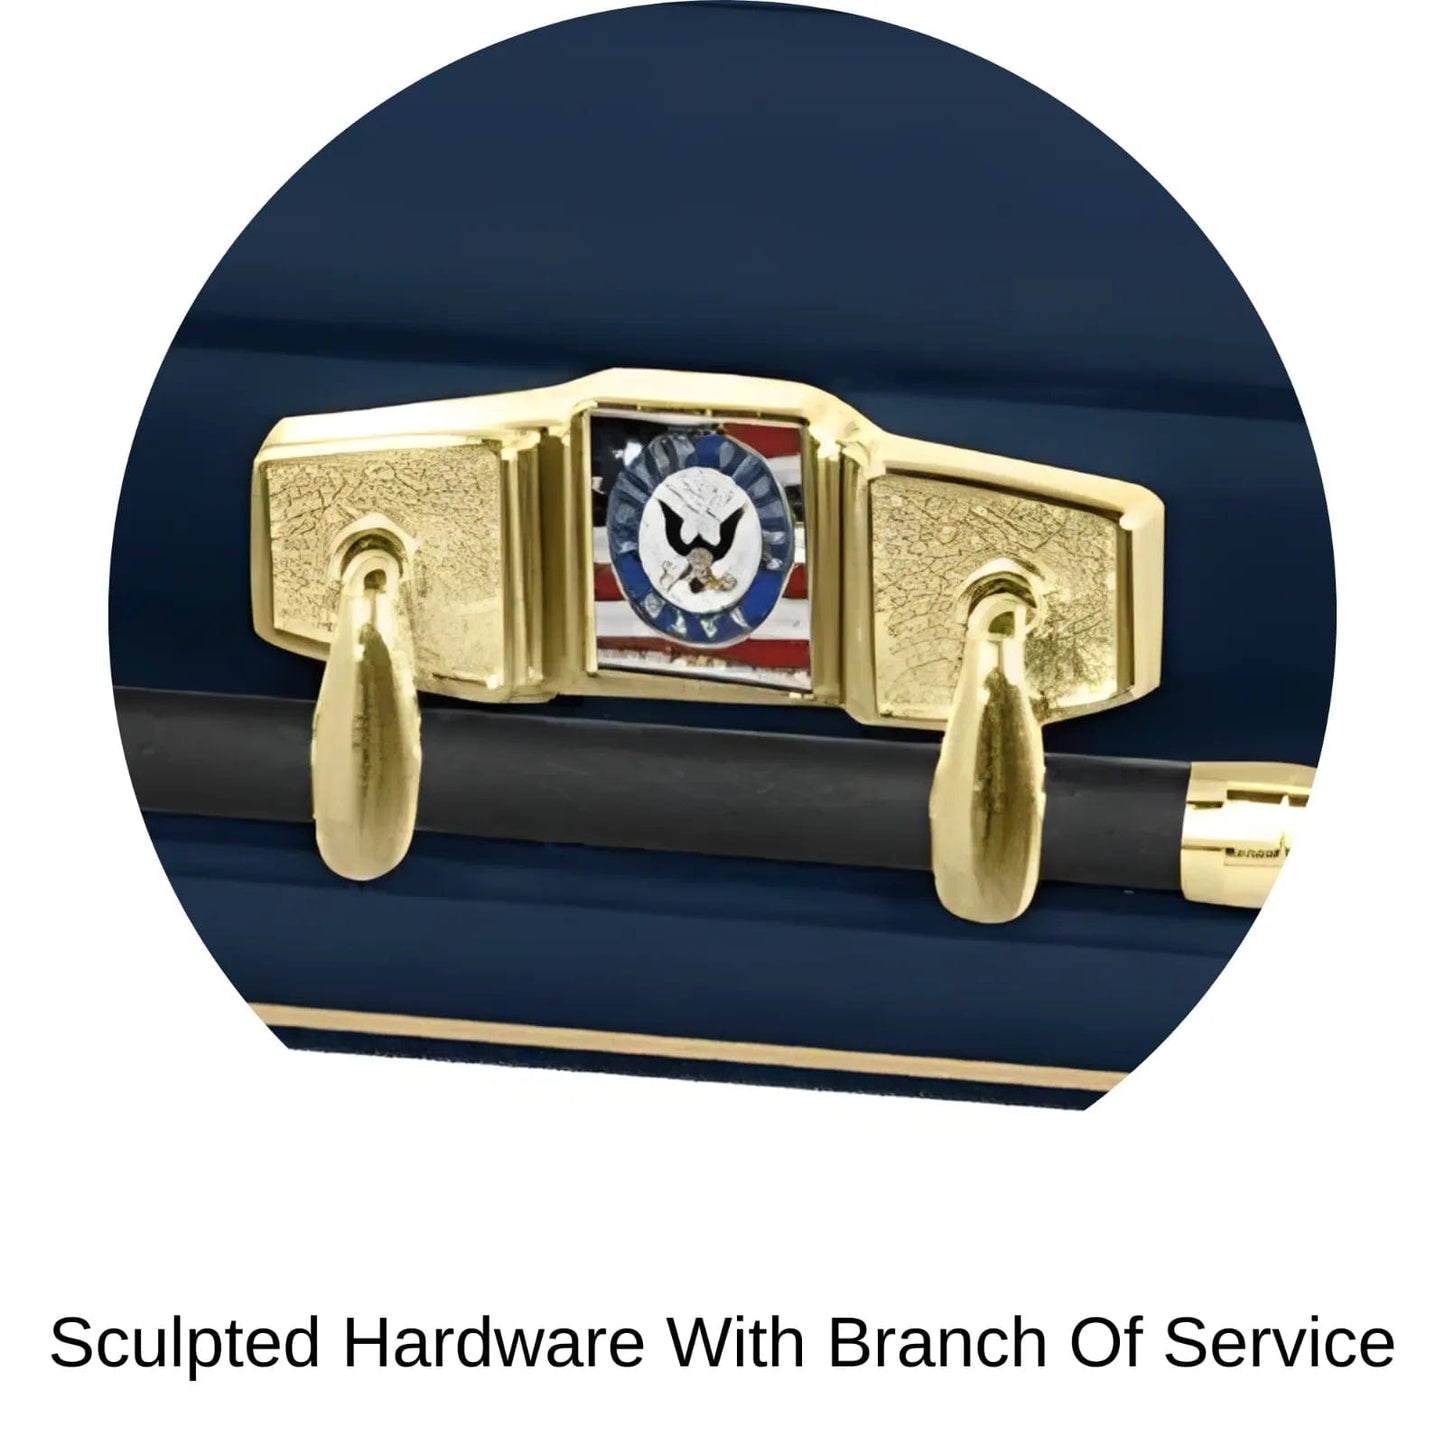 Sculpted hardware with branch of service Veteran select XL Navy over size casket